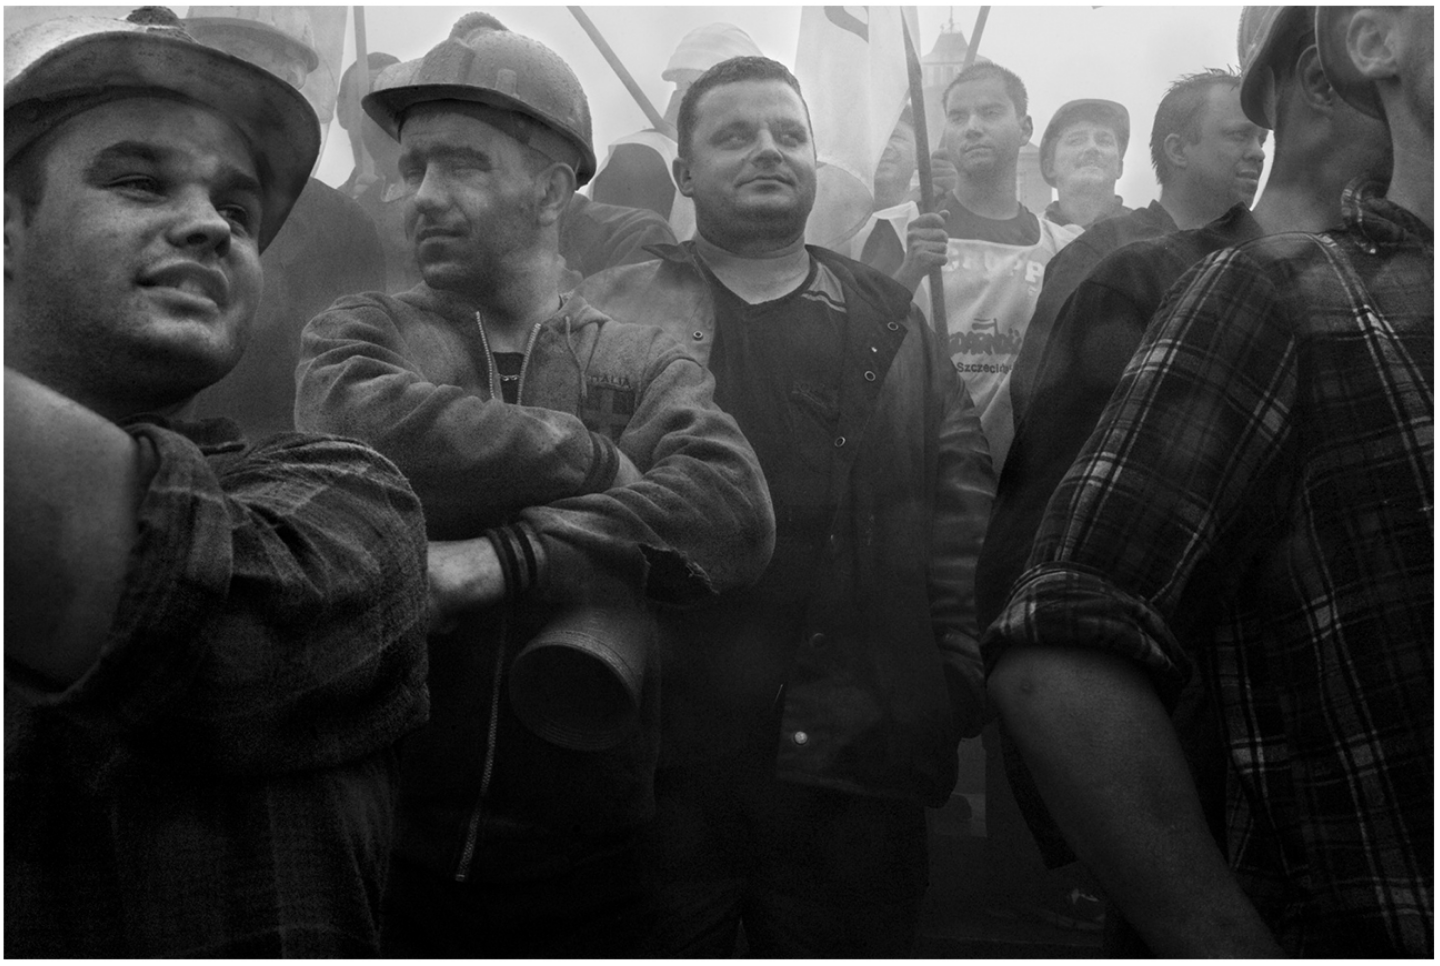 Shipyard workers - photography